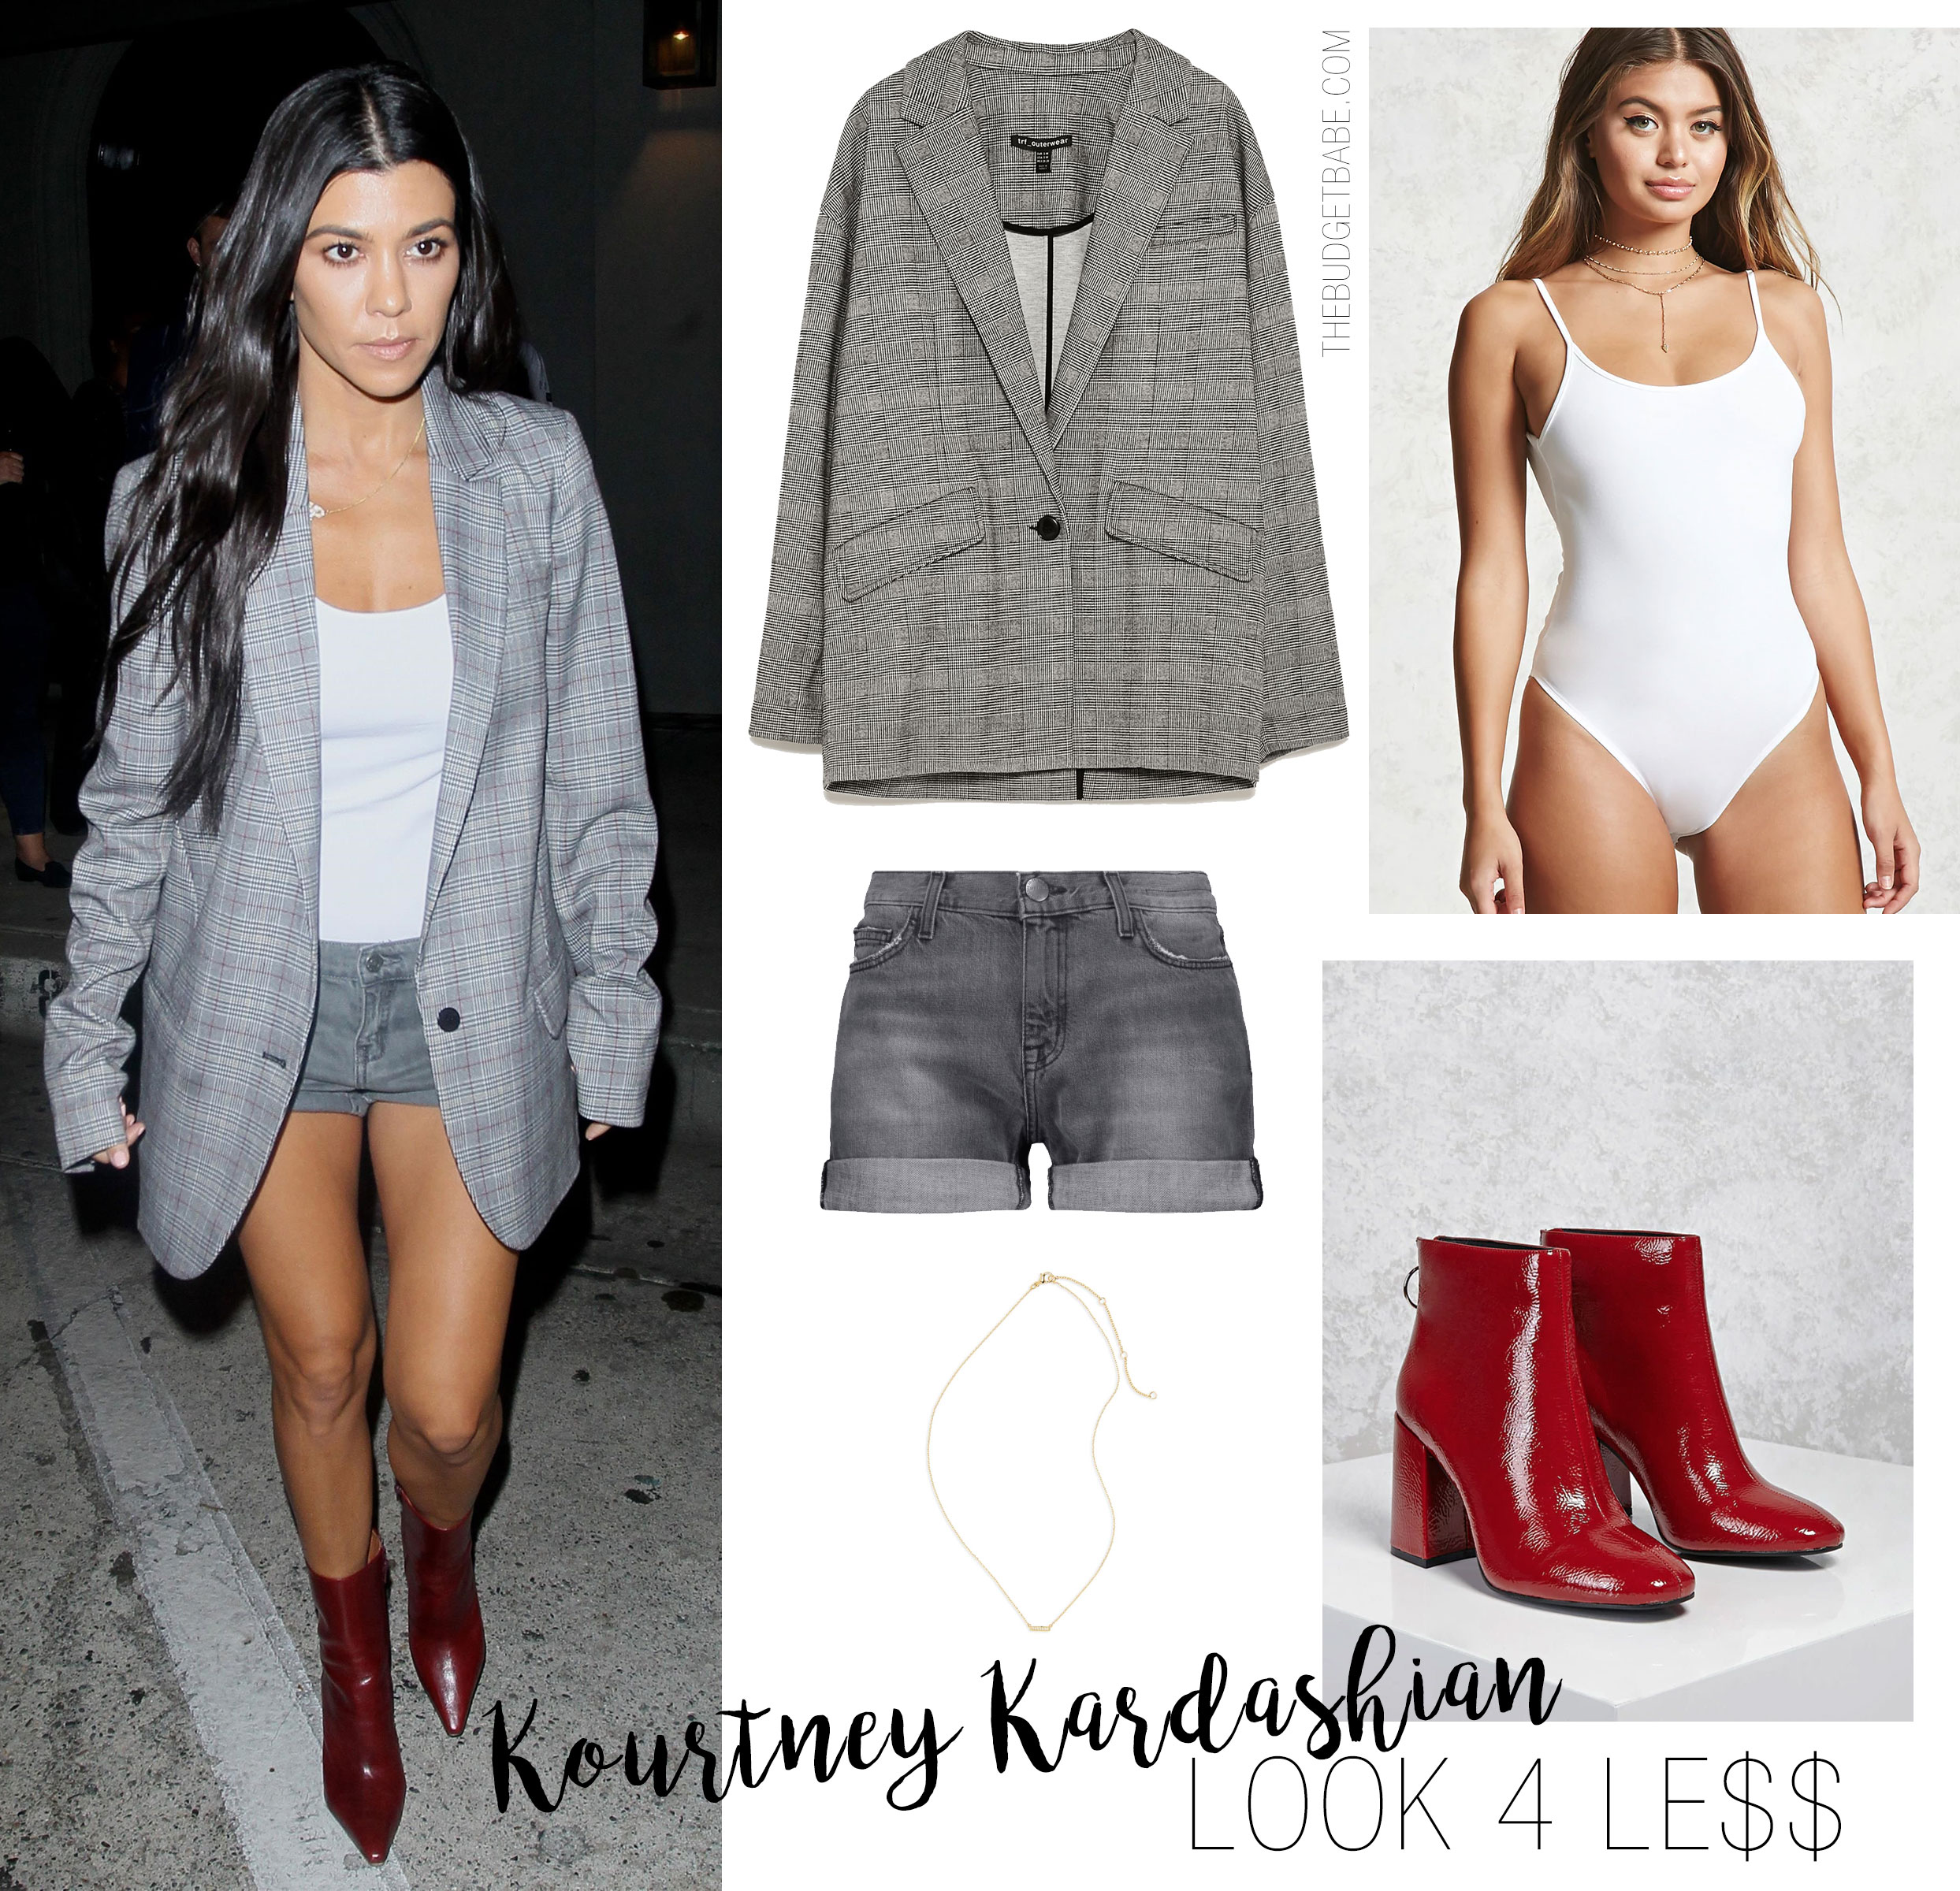 Kourtney Kardashian is seen leaving a restaurant in an oversized blazer, denim shorts and red ankle boots.